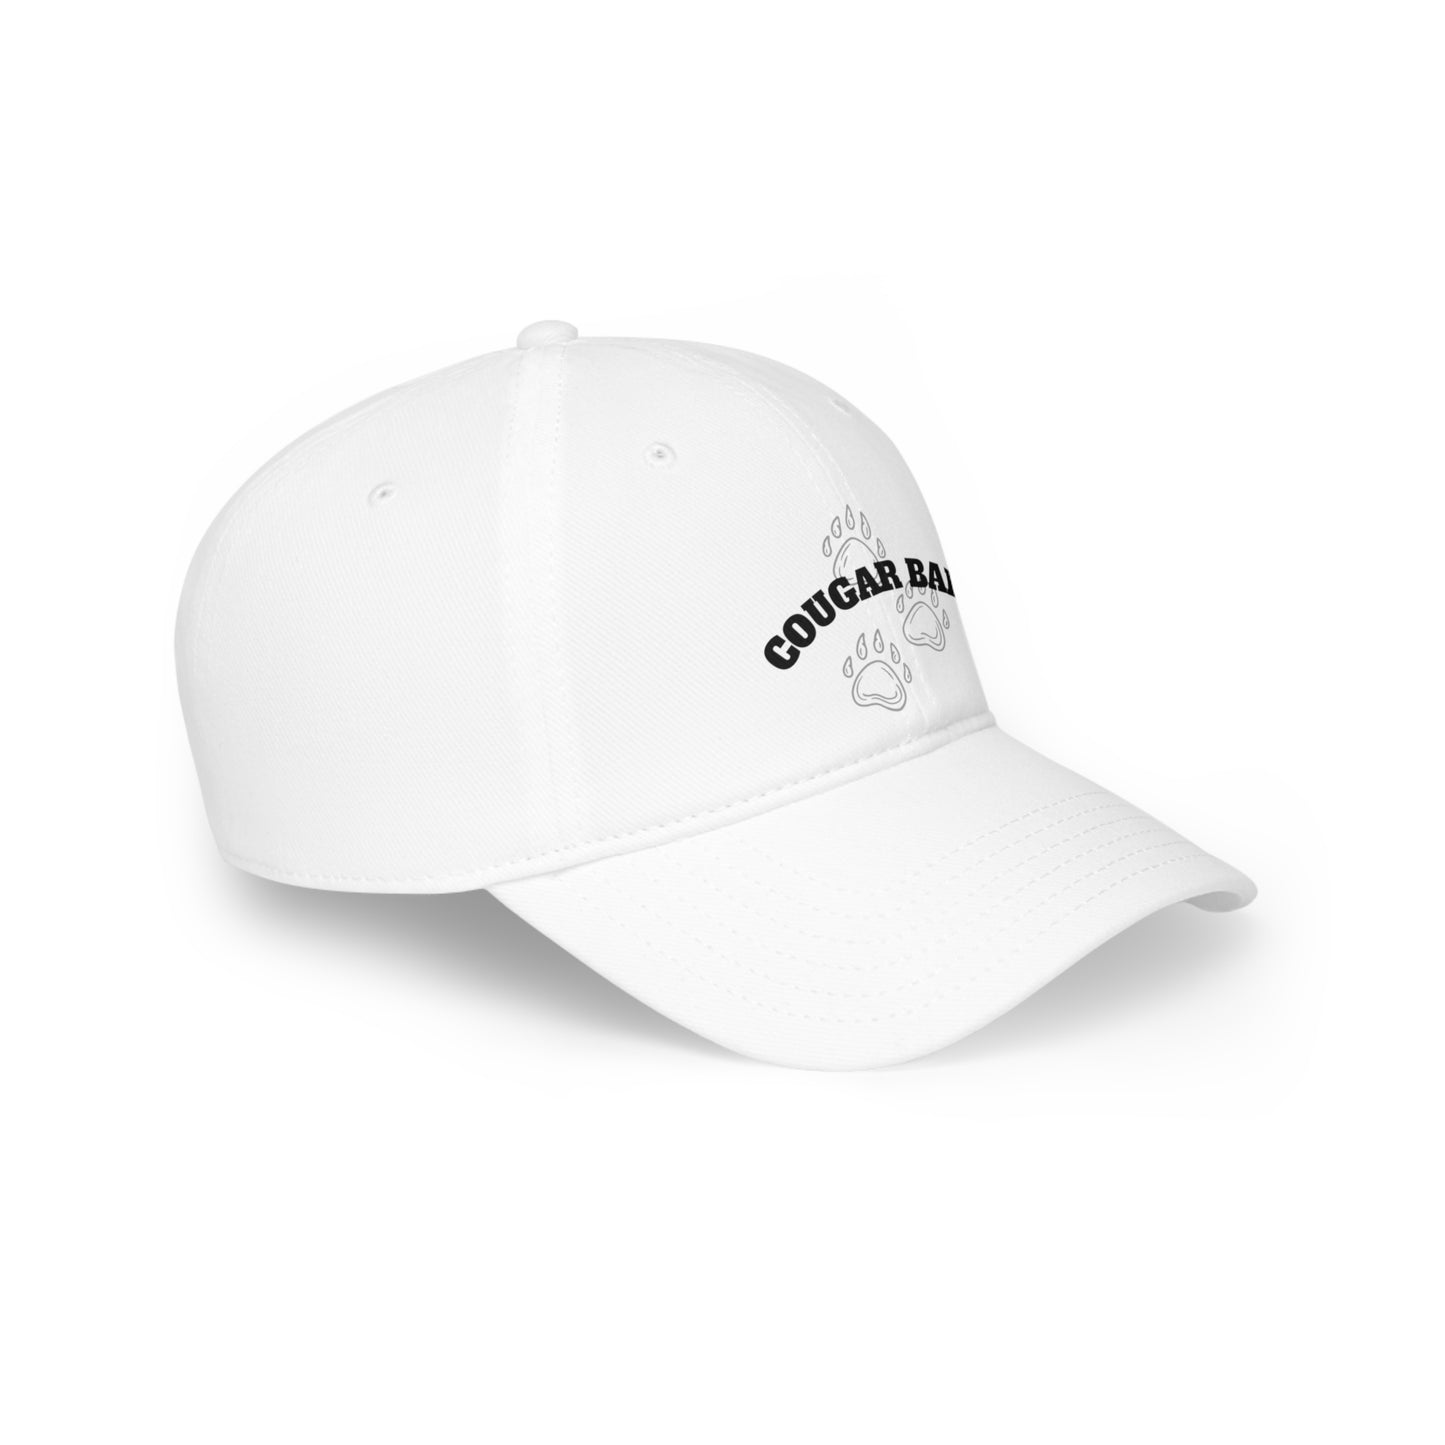 Low Profile Baseball Cap - Cougar Bait with paws